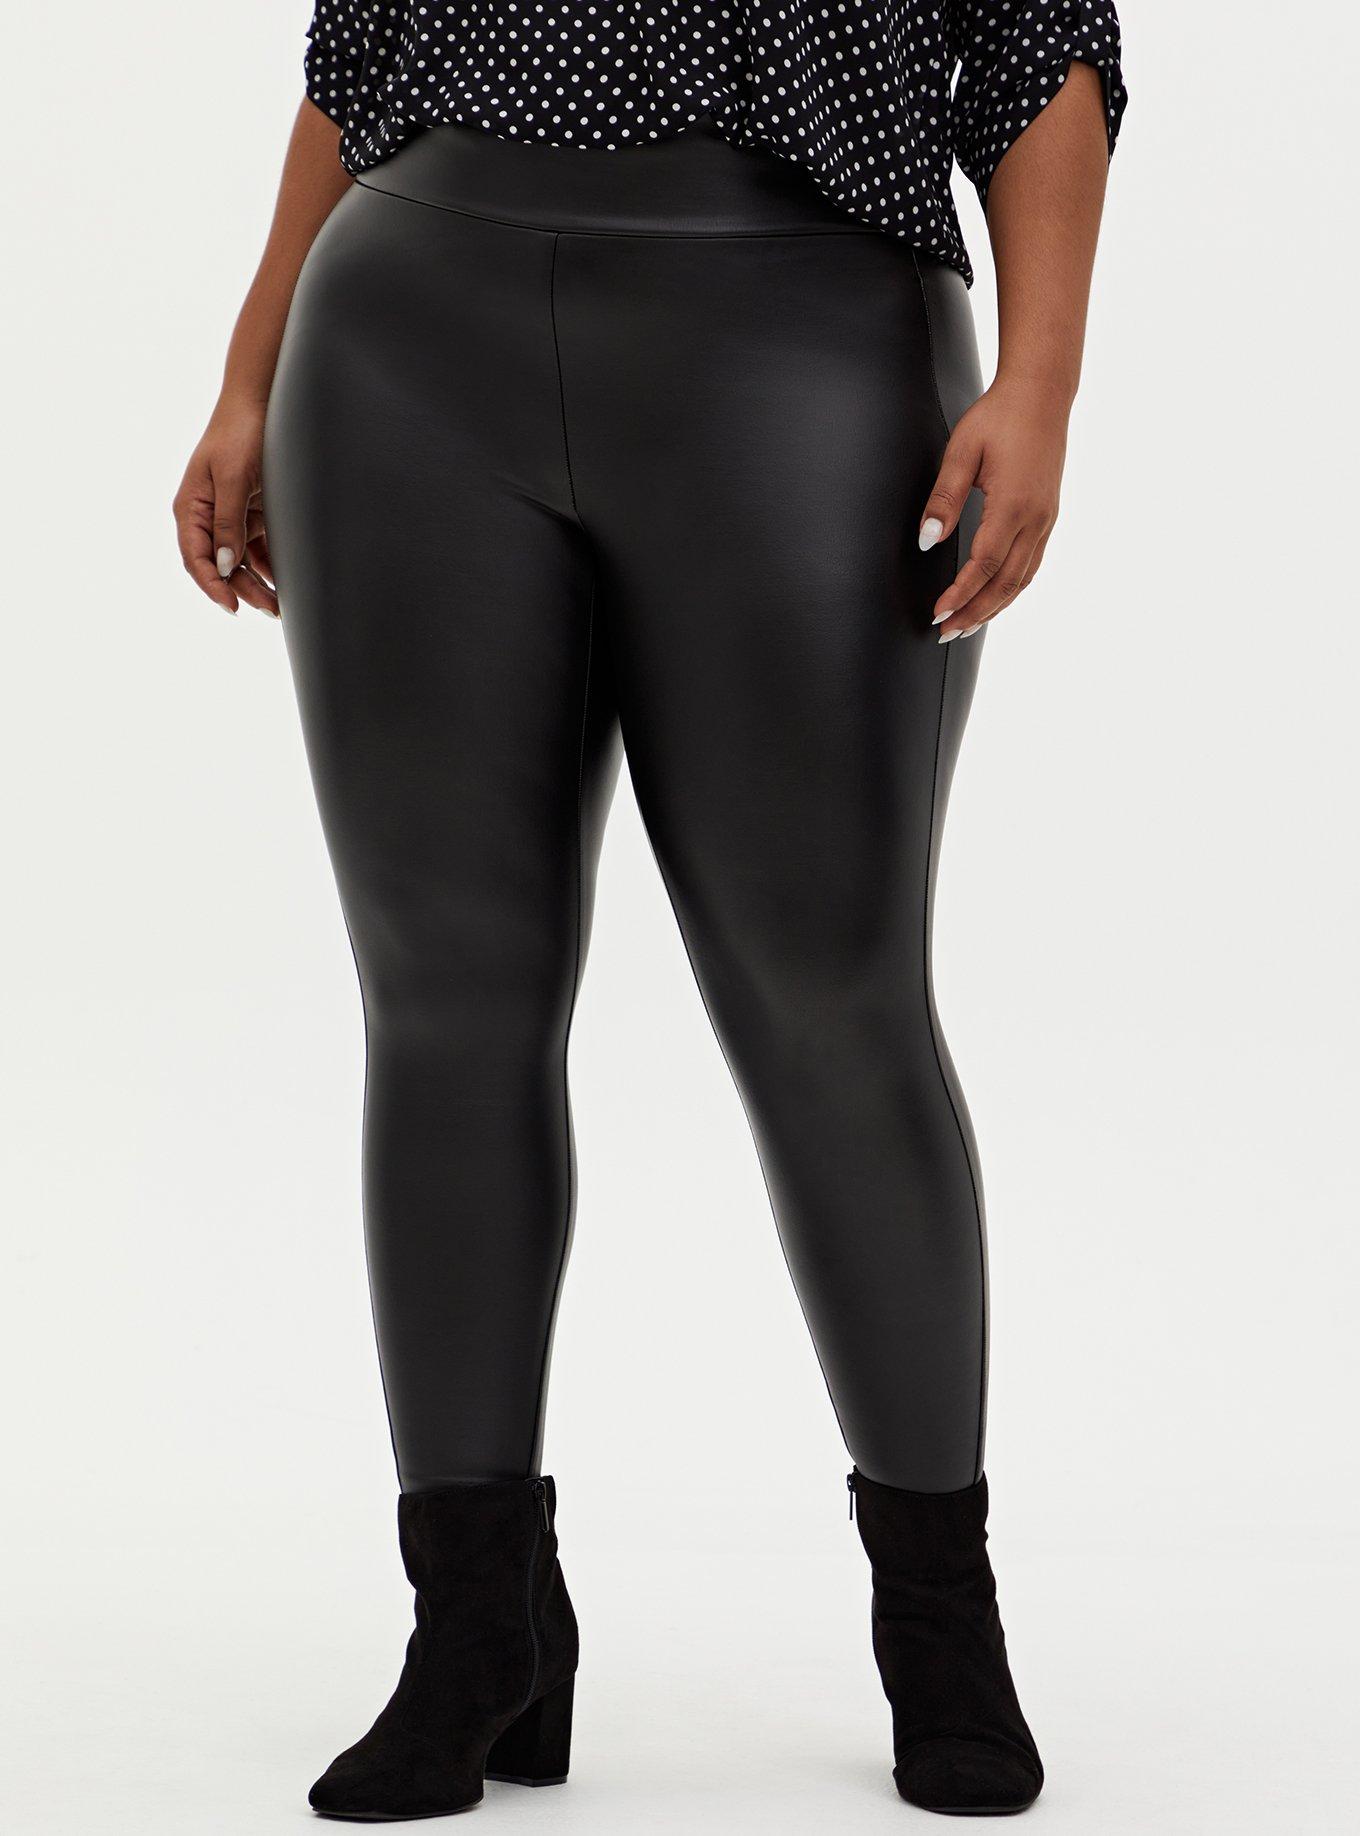 Premium Matte Faux Leather Leggings - Made in The USA